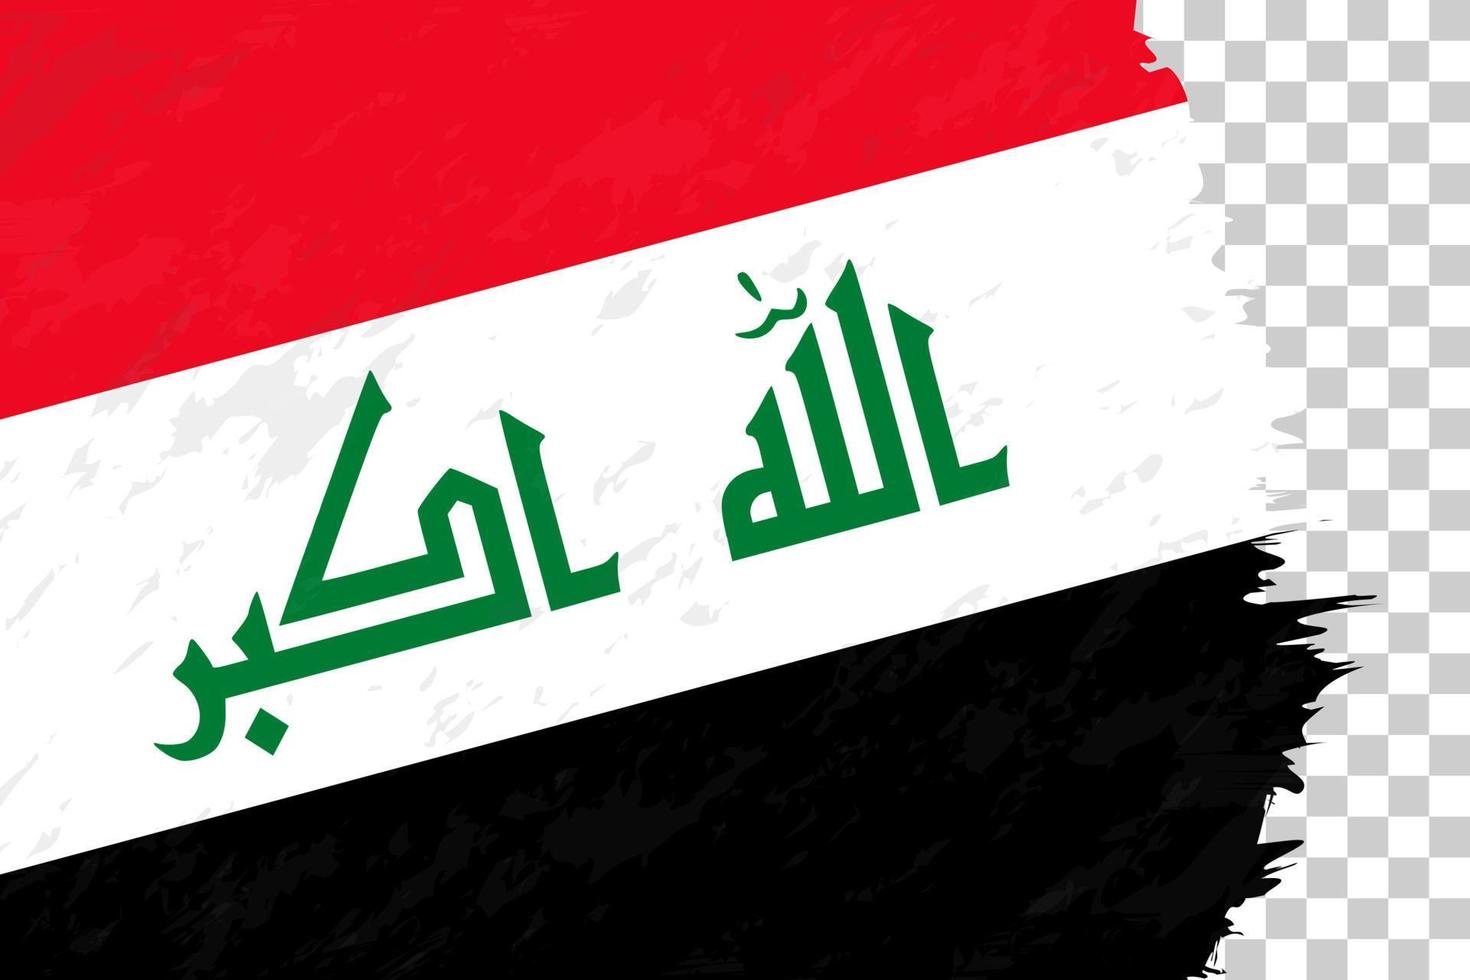 Horizontal Abstract Grunge Brushed Flag of Iraq on Transparent Grid. vector